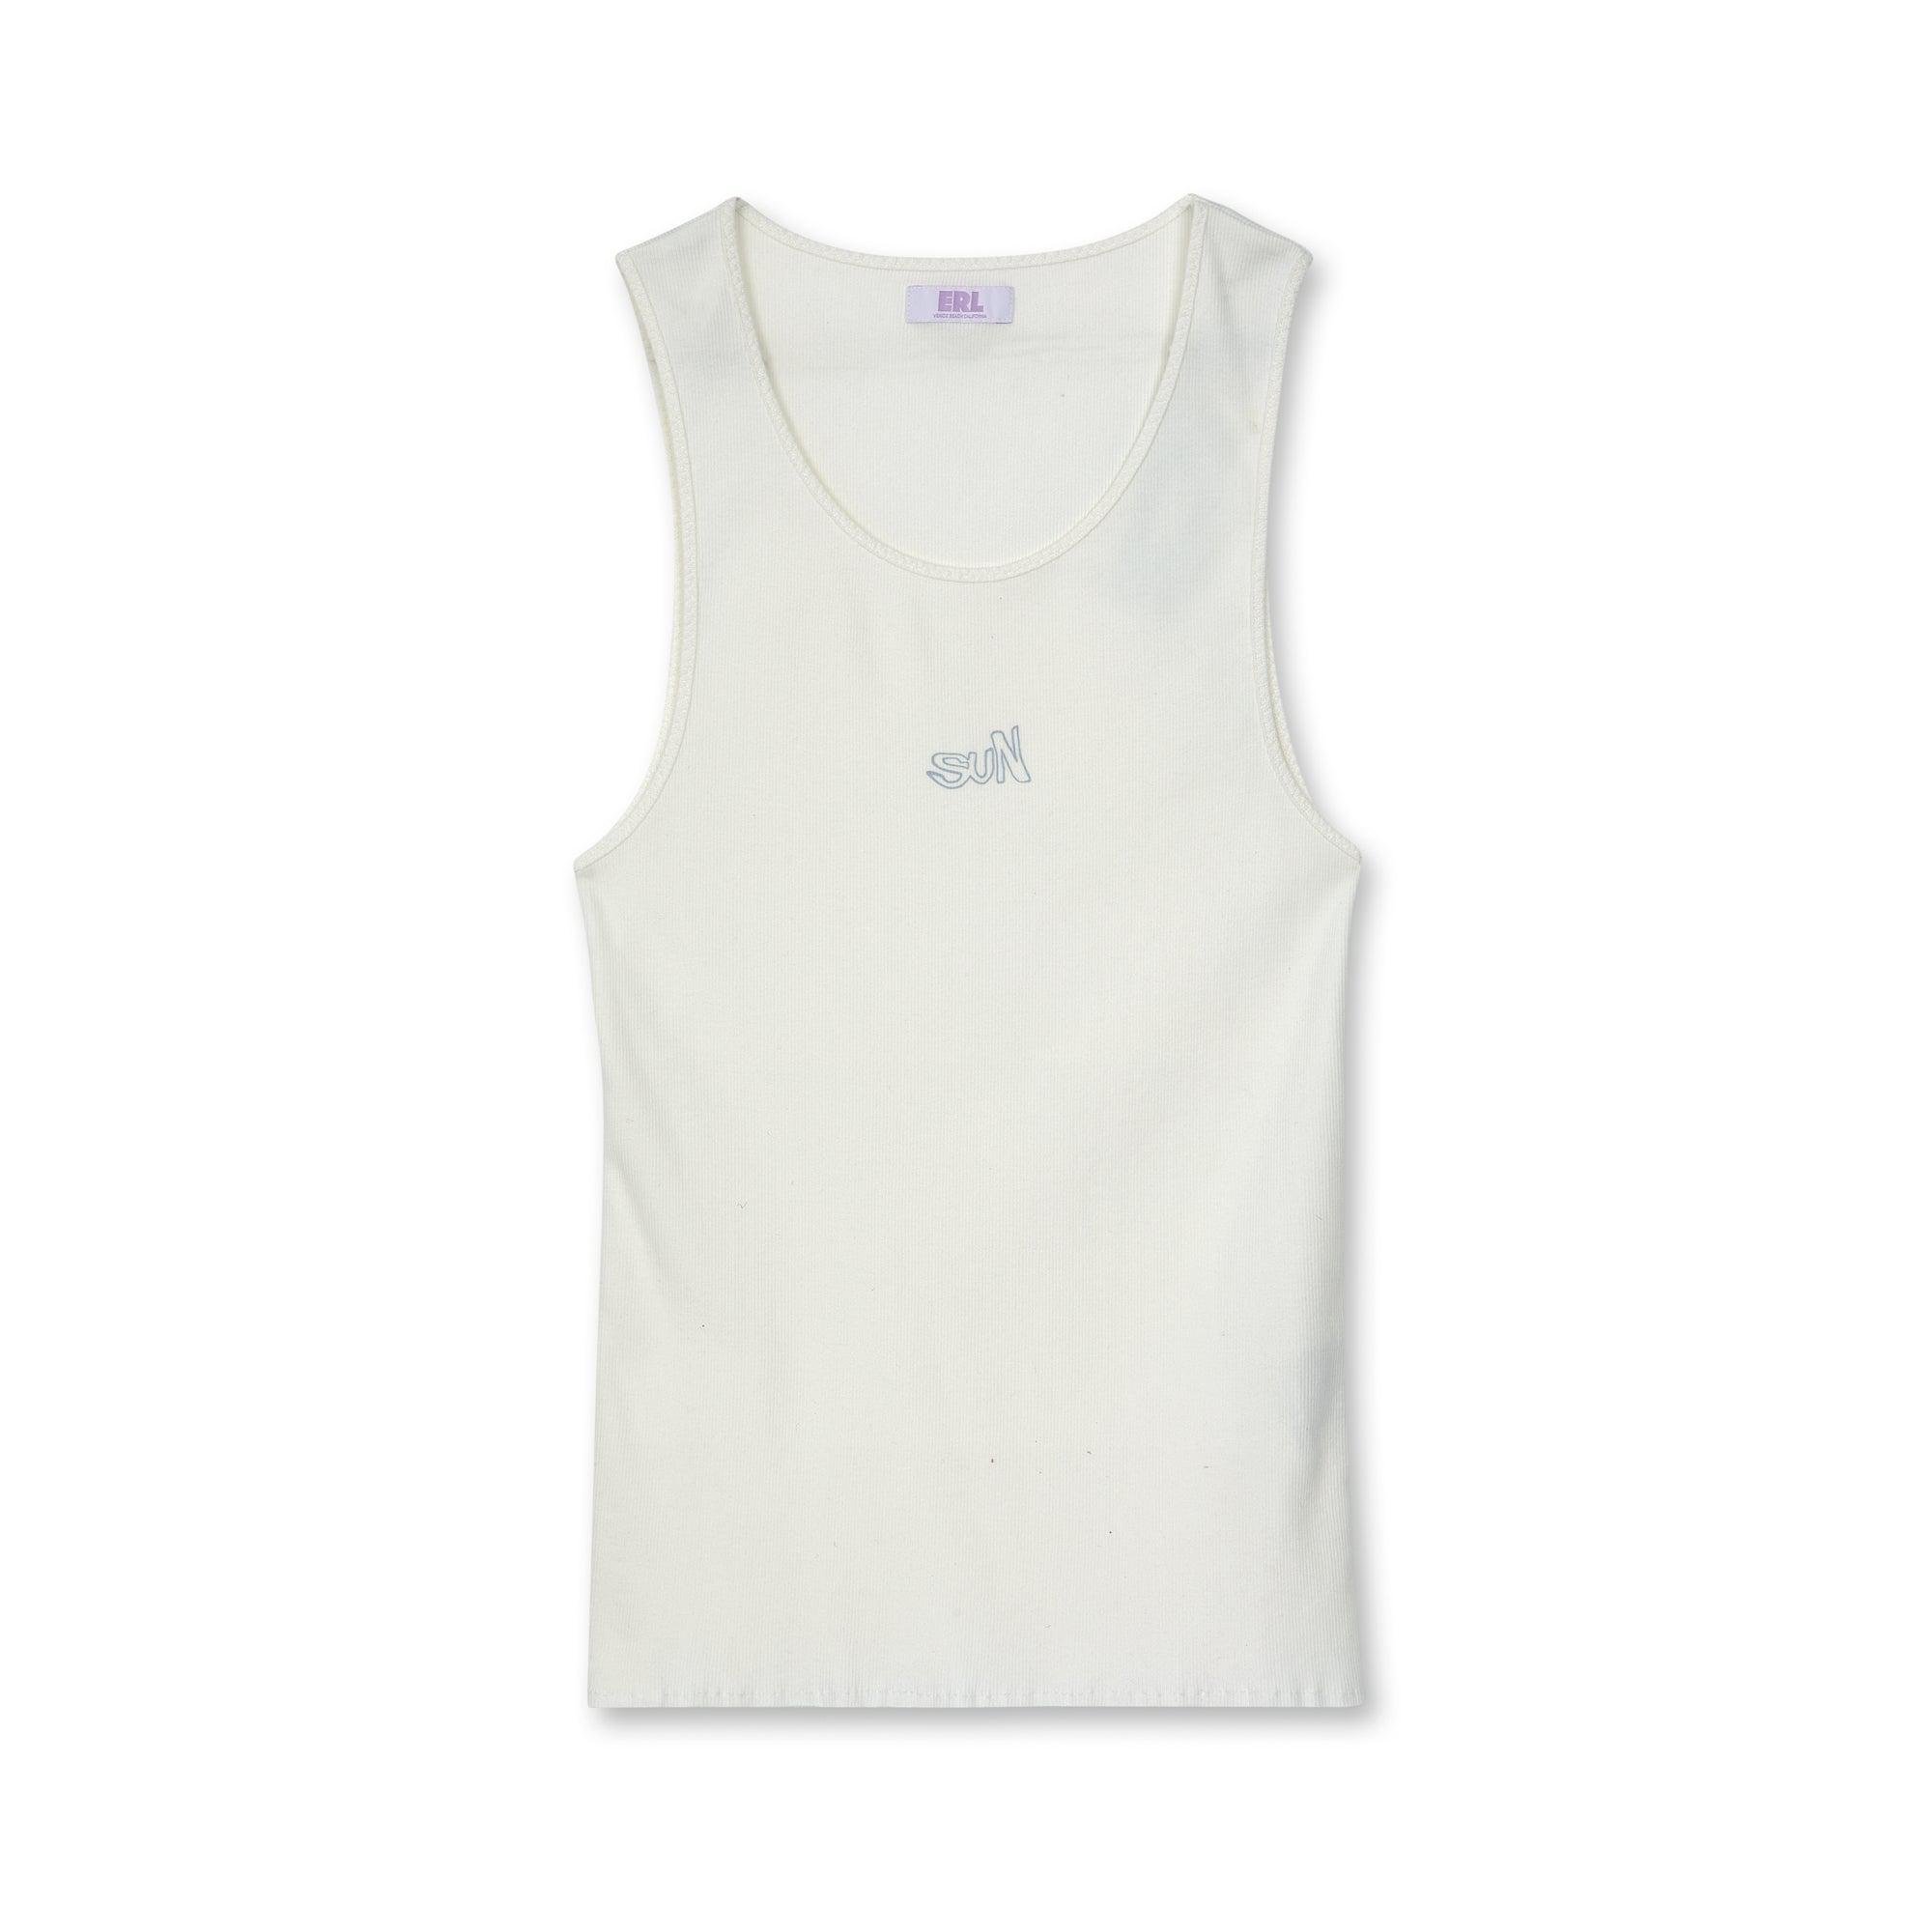 ERL - Men's Rib Knit Tank Top - (White) by ERL